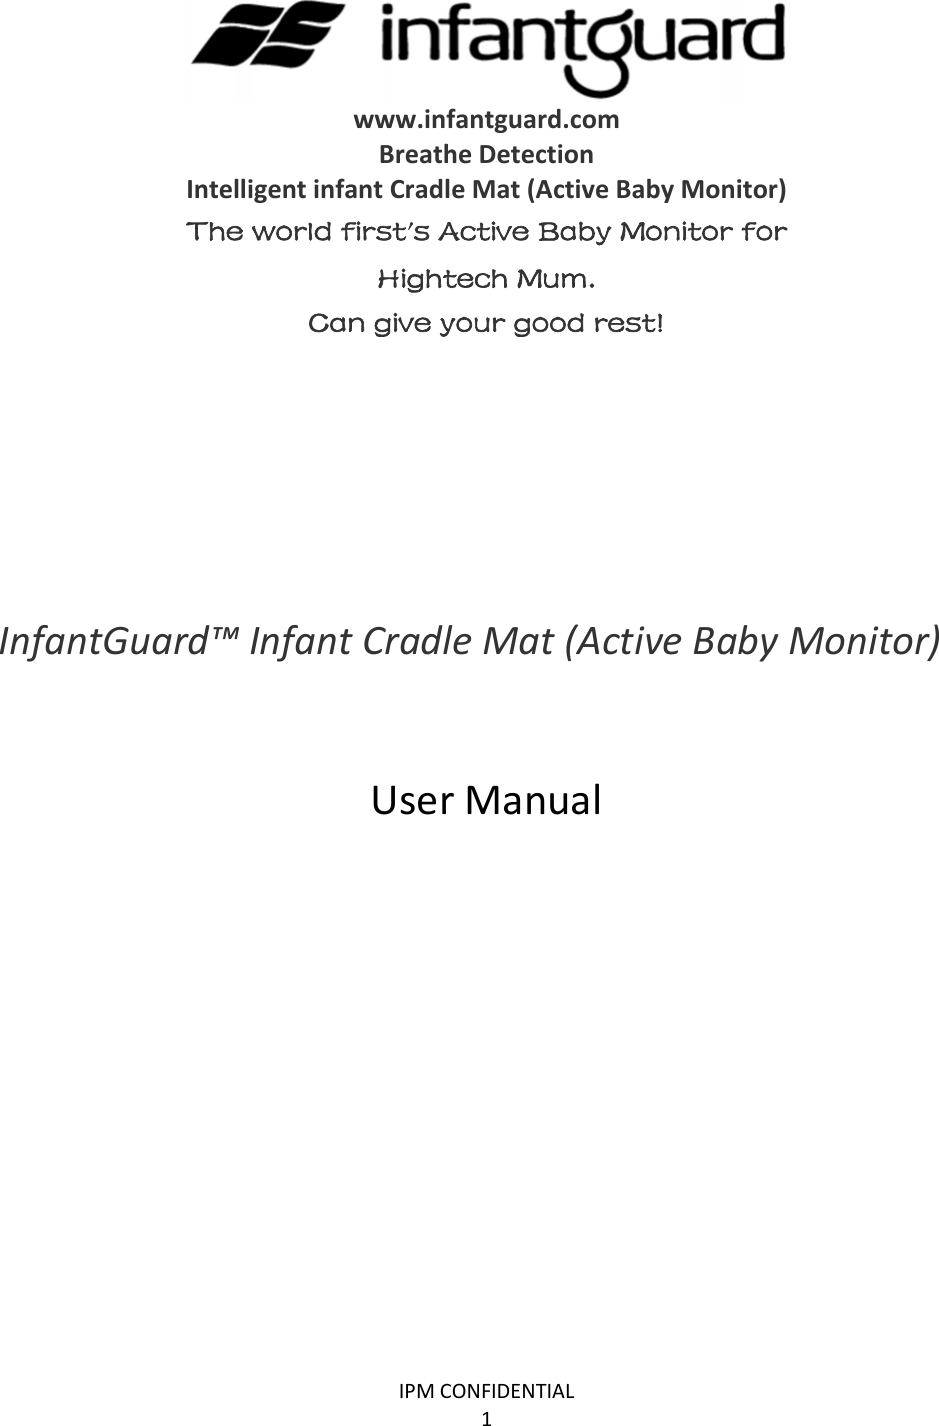 IPMCONFIDENTIAL1www.infantguard.comBreatheDetectionIntelligentinfantCradleMat(ActiveBabyMonitor)The world first’s Active Baby Monitor for  Hightech Mum. Can give your good rest! InfantGuard™InfantCradleMat(ActiveBabyMonitor)UserManual